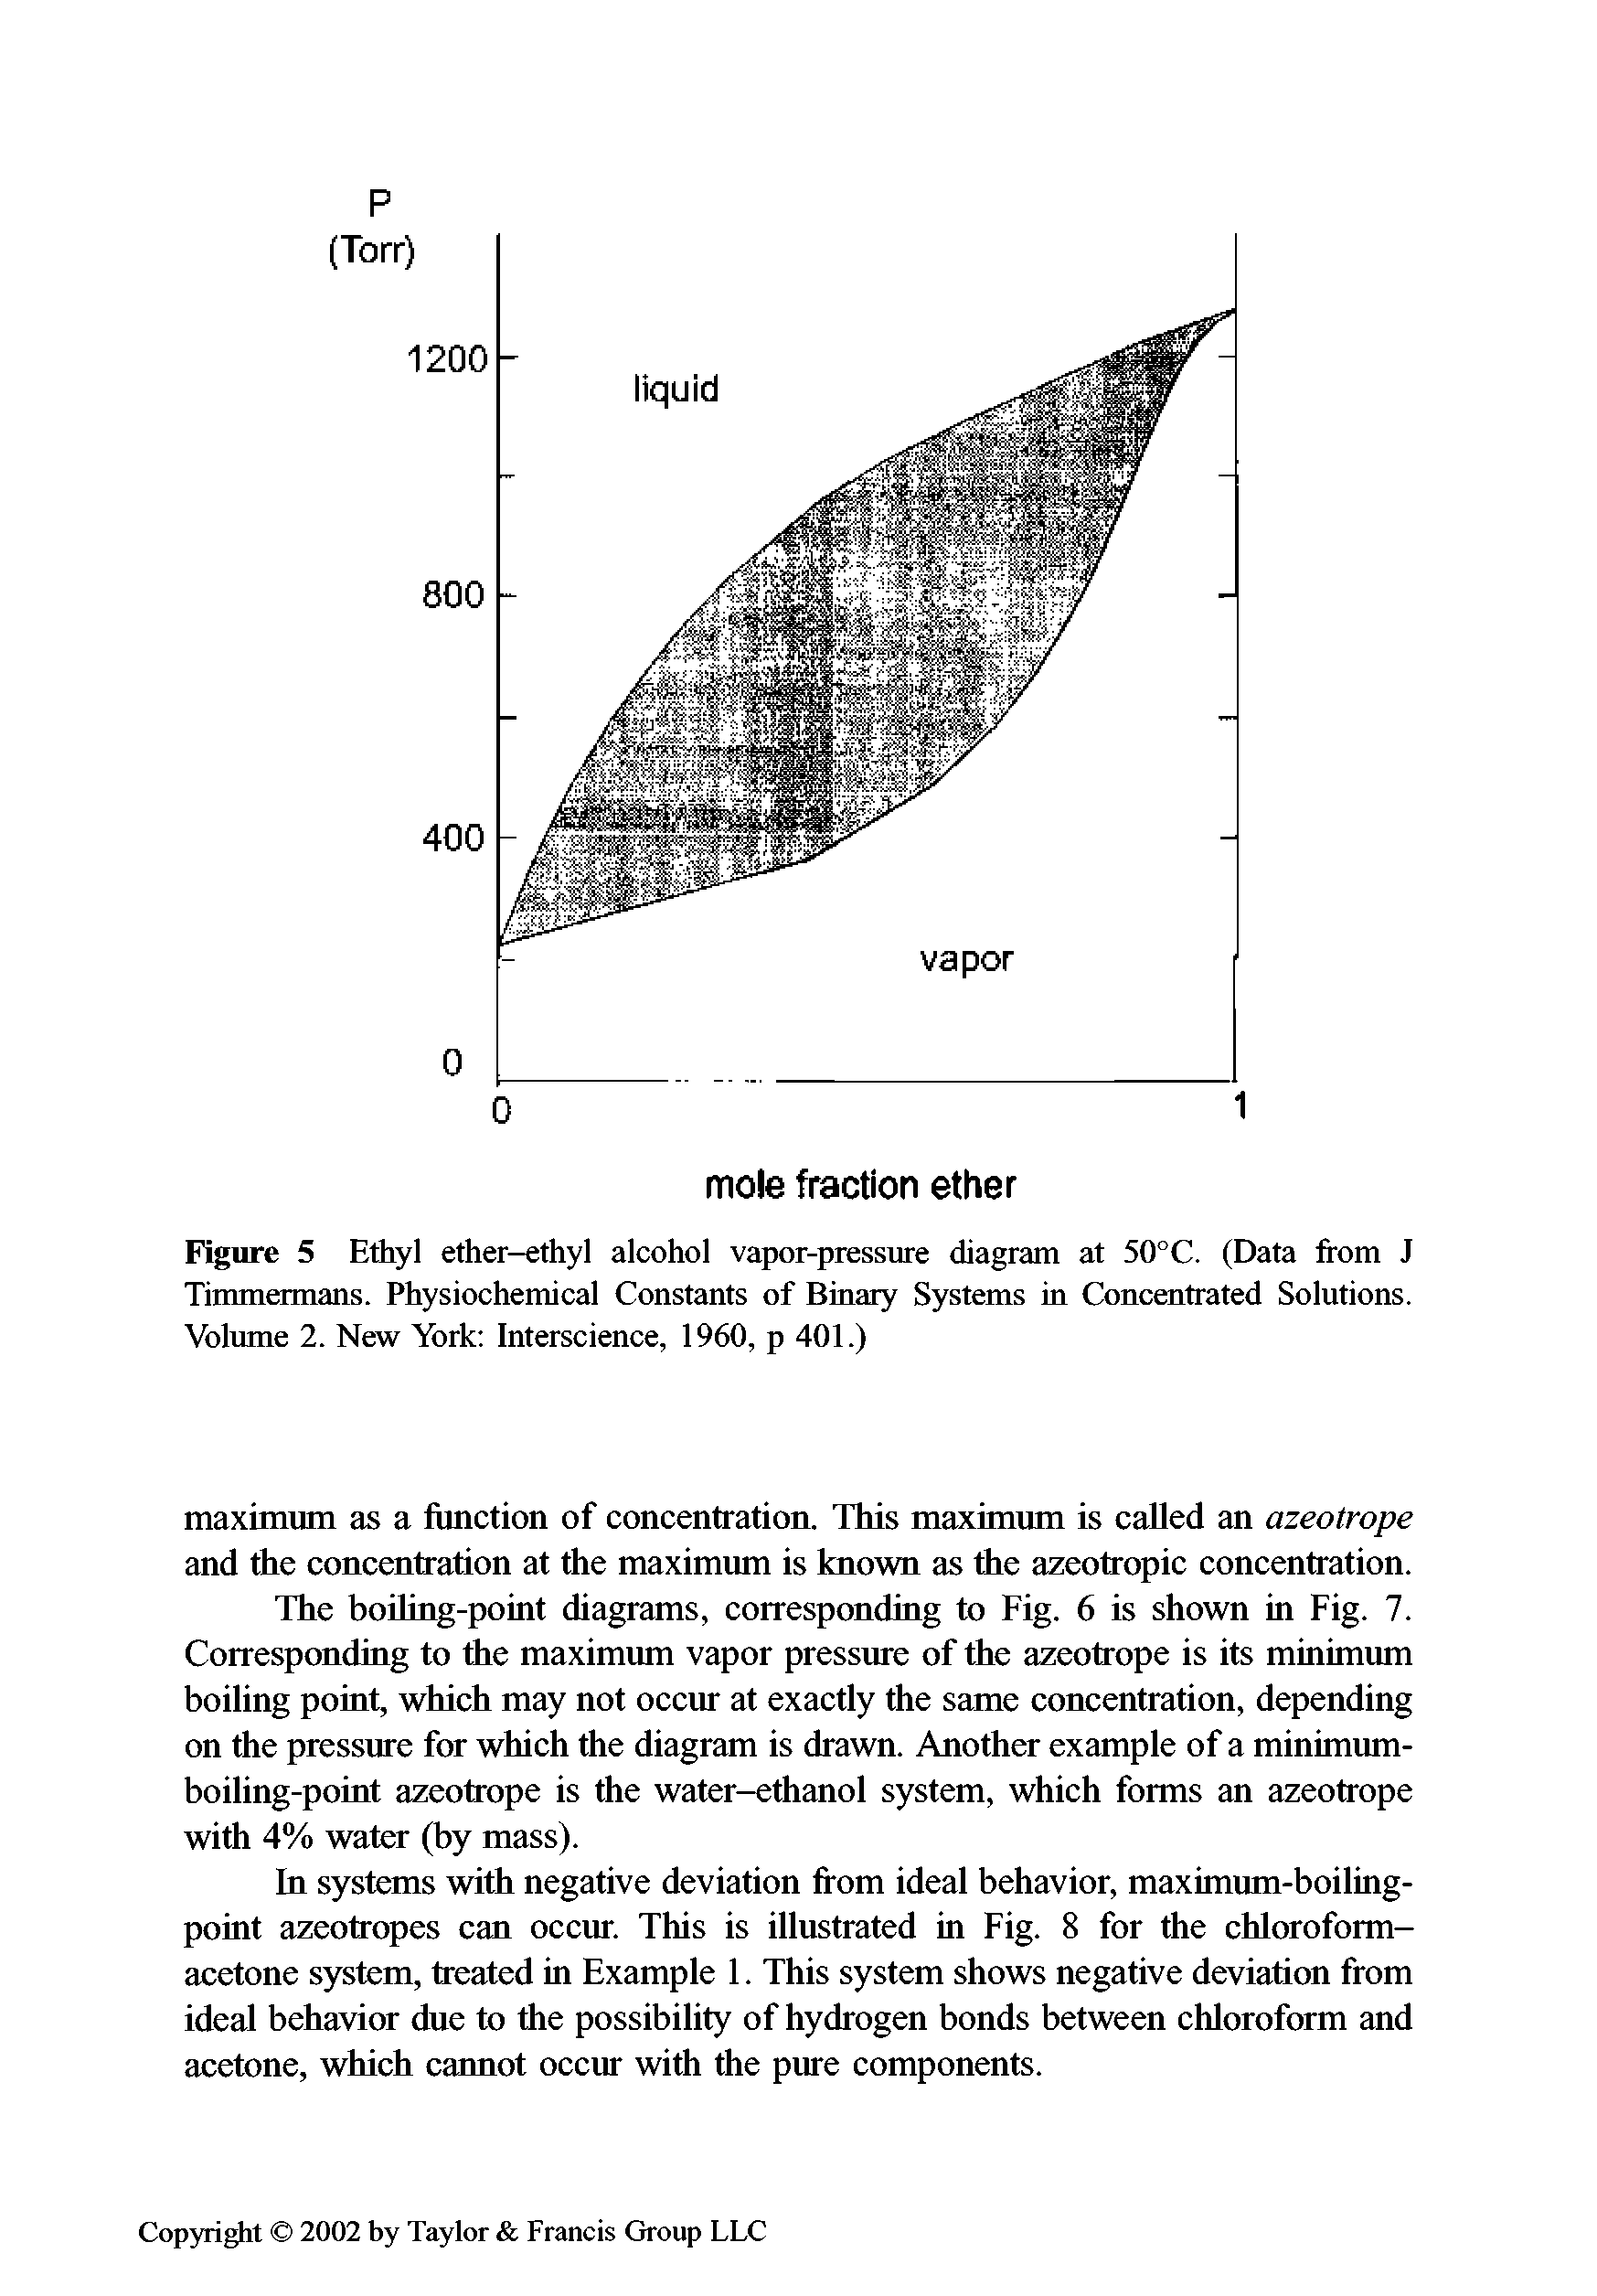 Figure 5 Ethyl ether-ethyl alcohol vapor-pressure diagram at 50°C. (Data from J Timmermans. Physiochemical Constants of Binary Systems in Concentrated Solutions. Volume 2. New York Interscience, 1960, p 401.)...